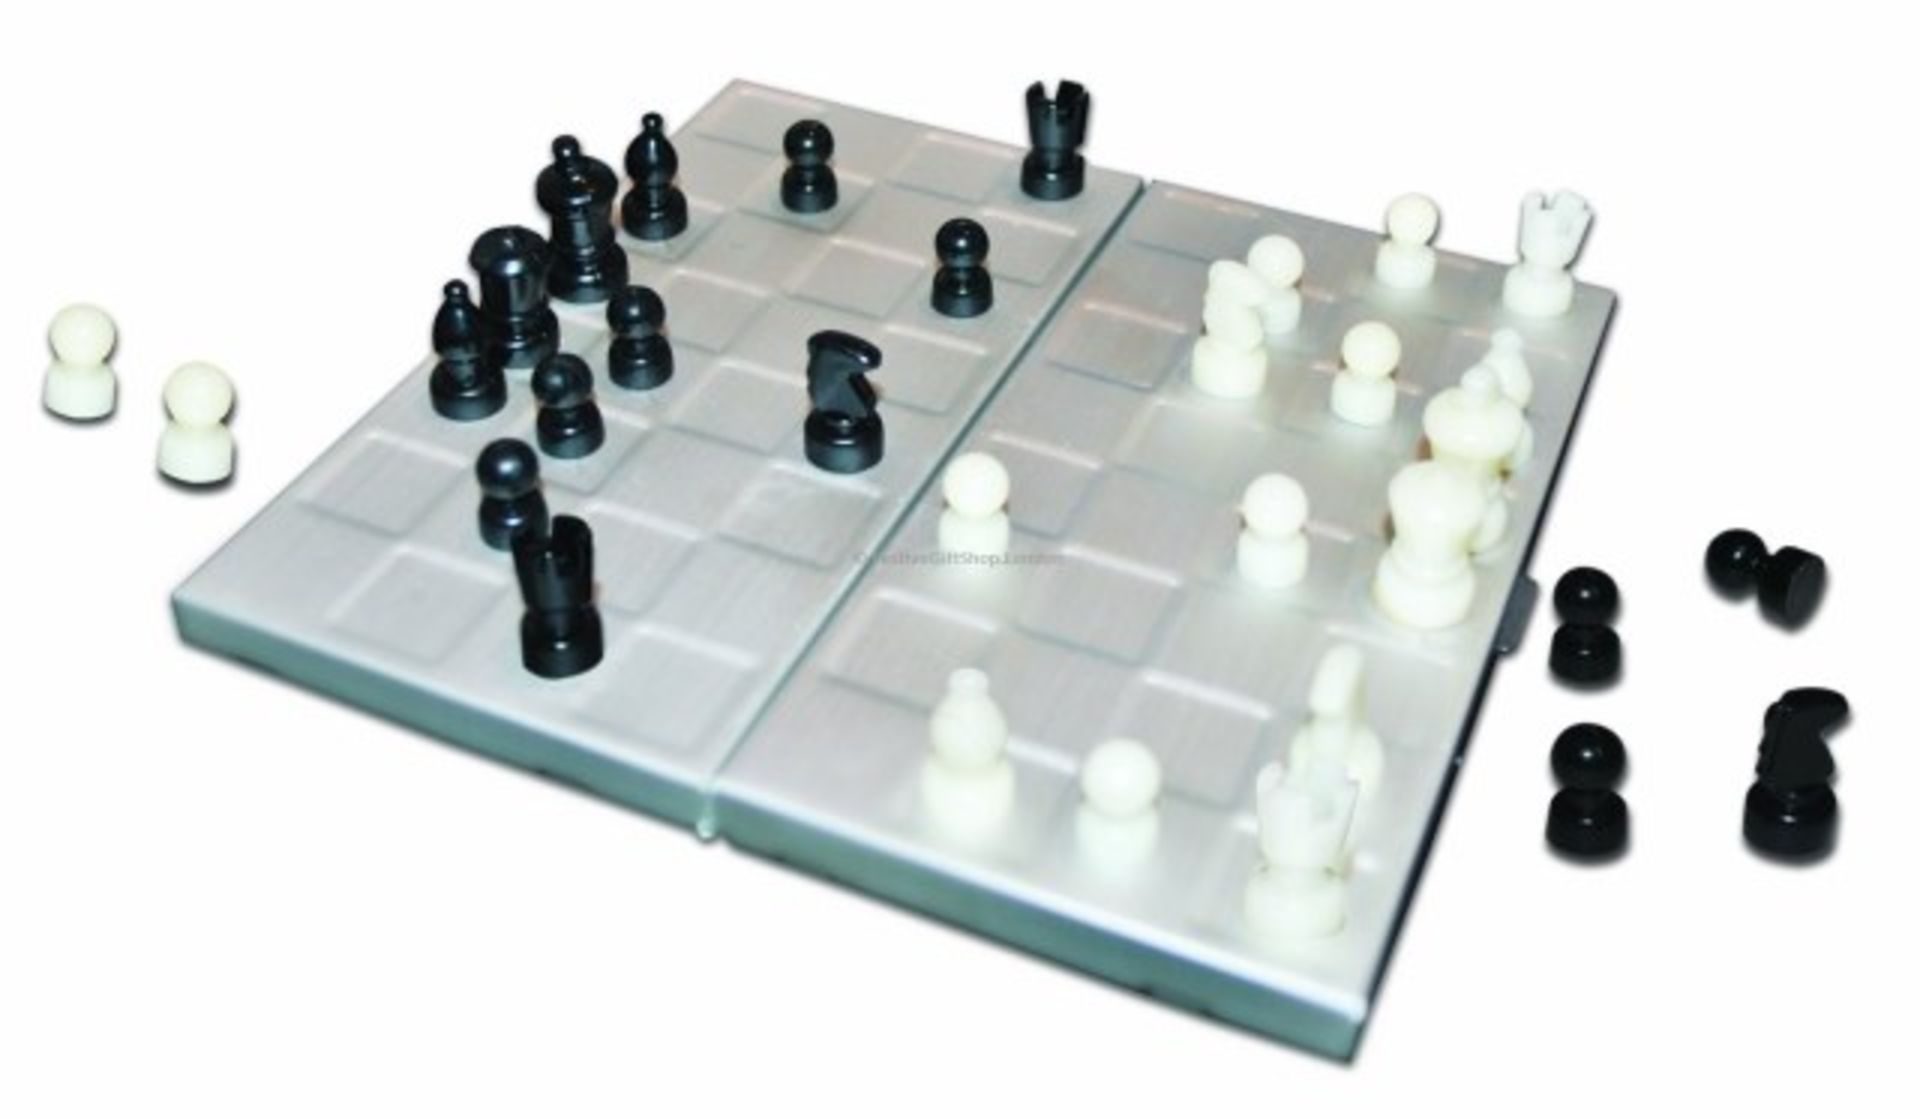 V *TRADE QTY* Brand New Magnetic Chess Set In Aluminium case X 3 Bid price to be multiplied by